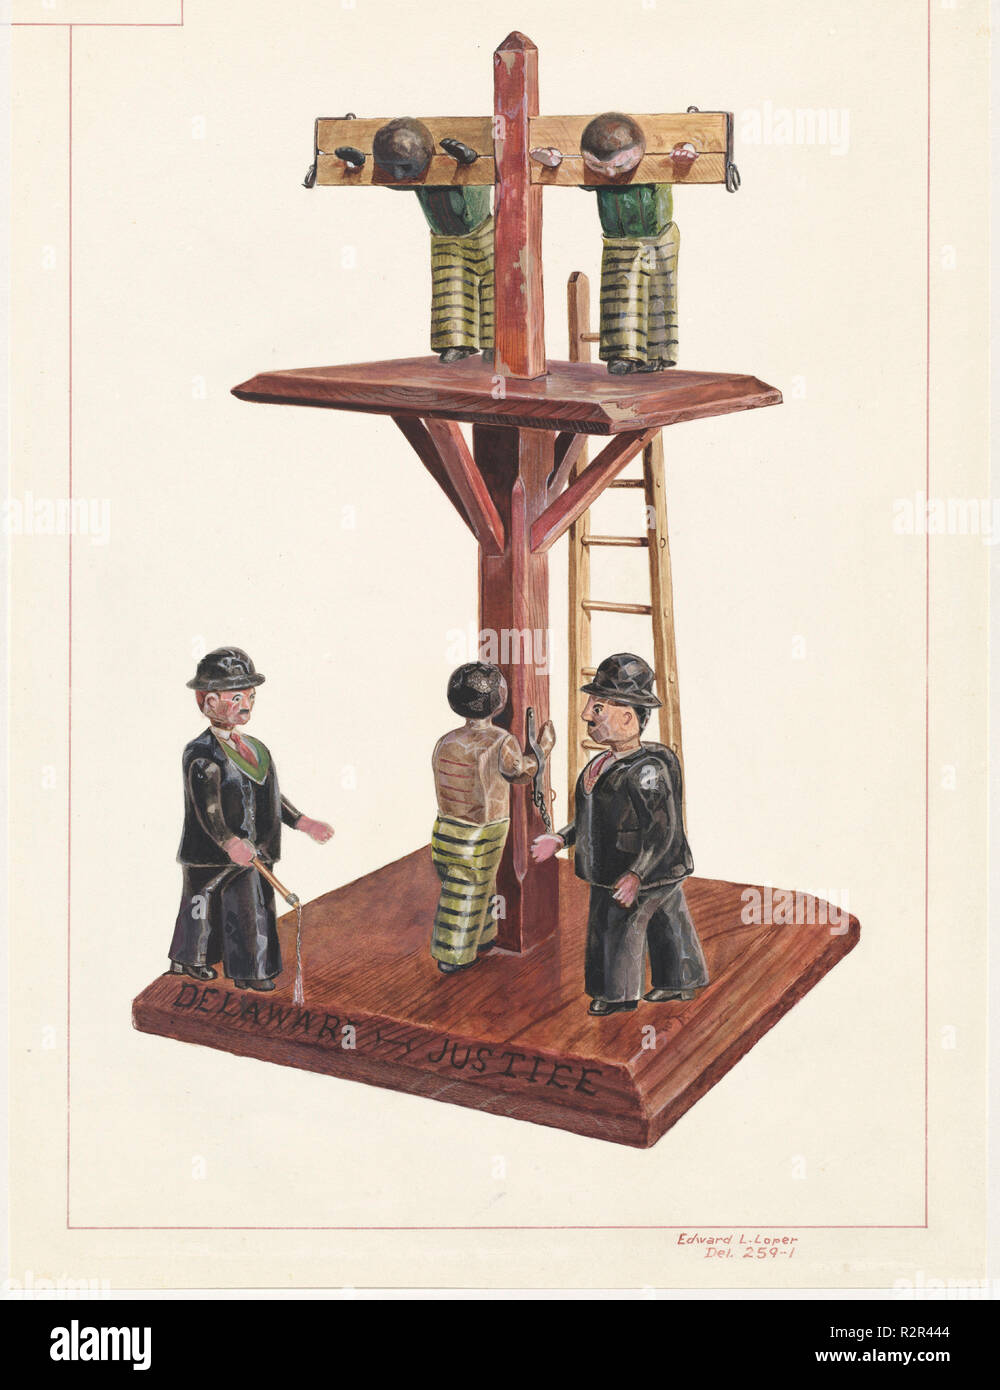 Whipping Post. Dated: 1935/1942. Dimensions: overall: 39.2 x 30.2 cm (15 7/16 x 11 7/8 in.). Medium: watercolor, graphite, and colored pencil on paper. Museum: National Gallery of Art, Washington DC. Author: Edward L. Loper. Stock Photo